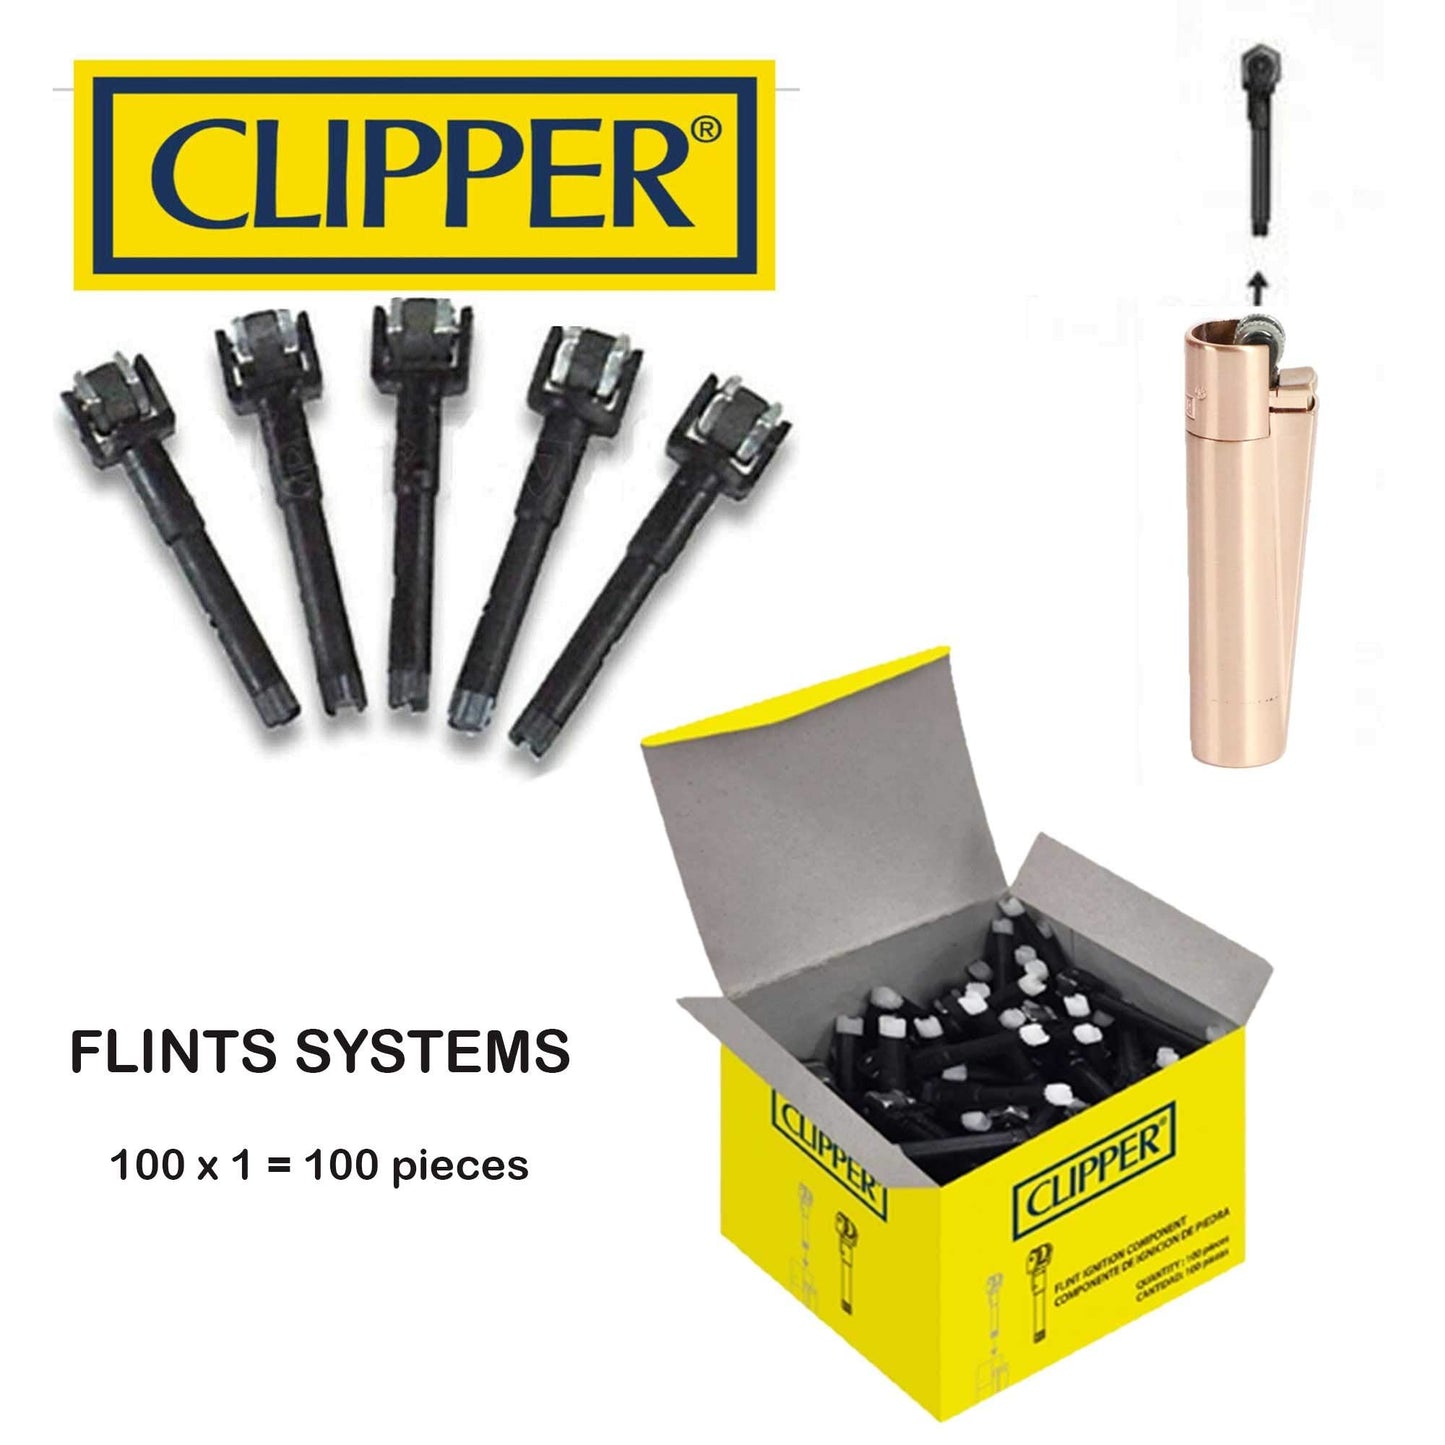 Clipper Lighters System Flints Barrel Replacements Wheel - Flint Ignition Component Pack Of 100 Pieces - iHATS LONDON UK Collection